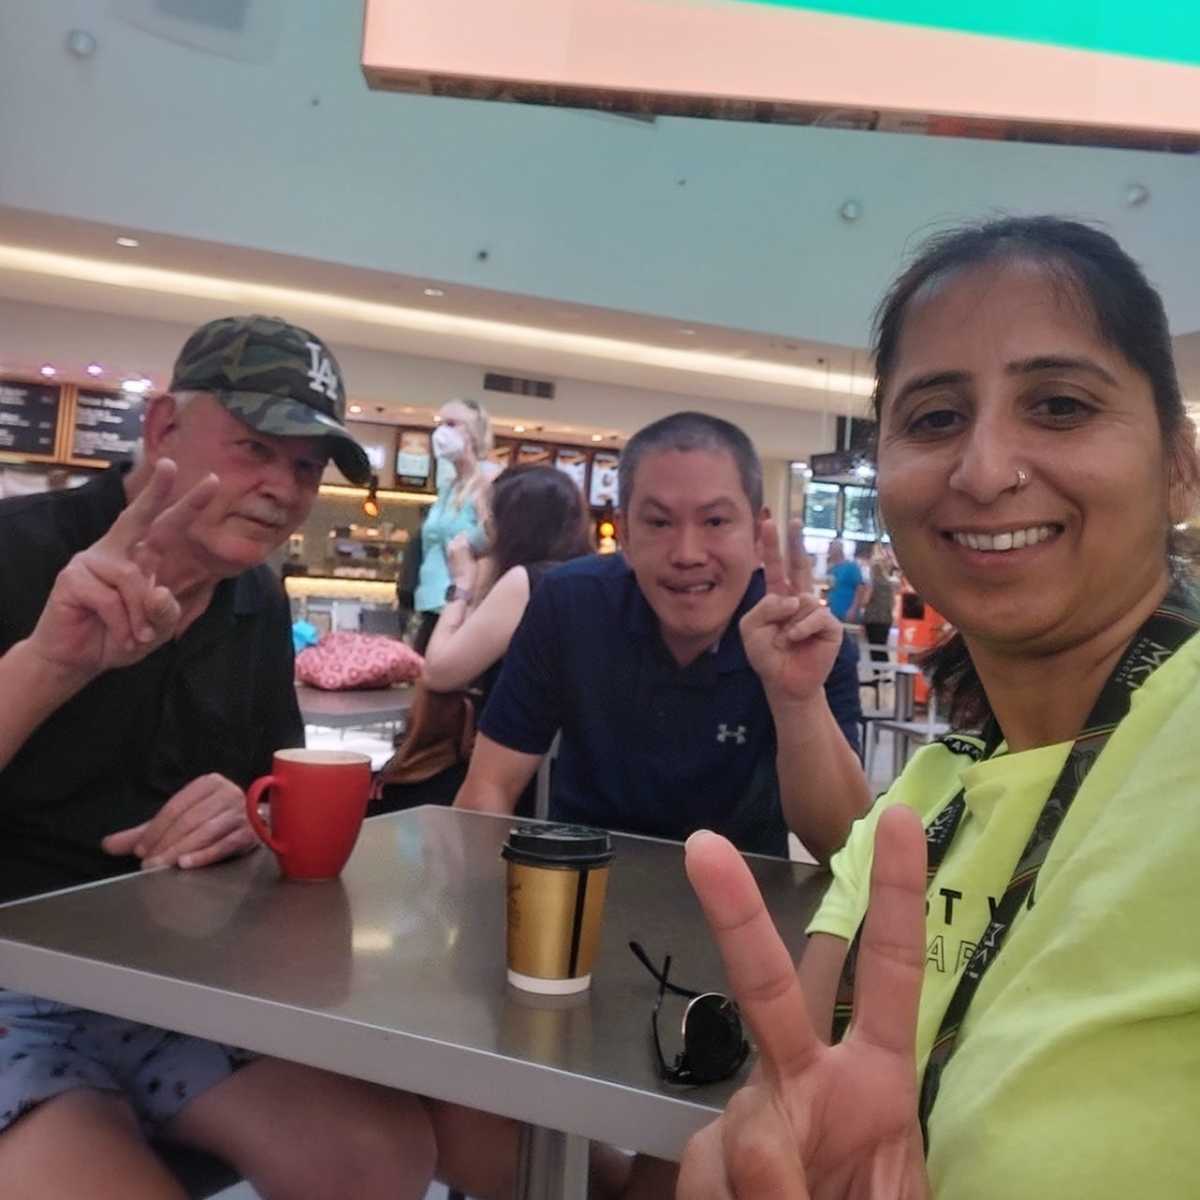 Two of the housemates with a support worker having coffee in a shopping centre.